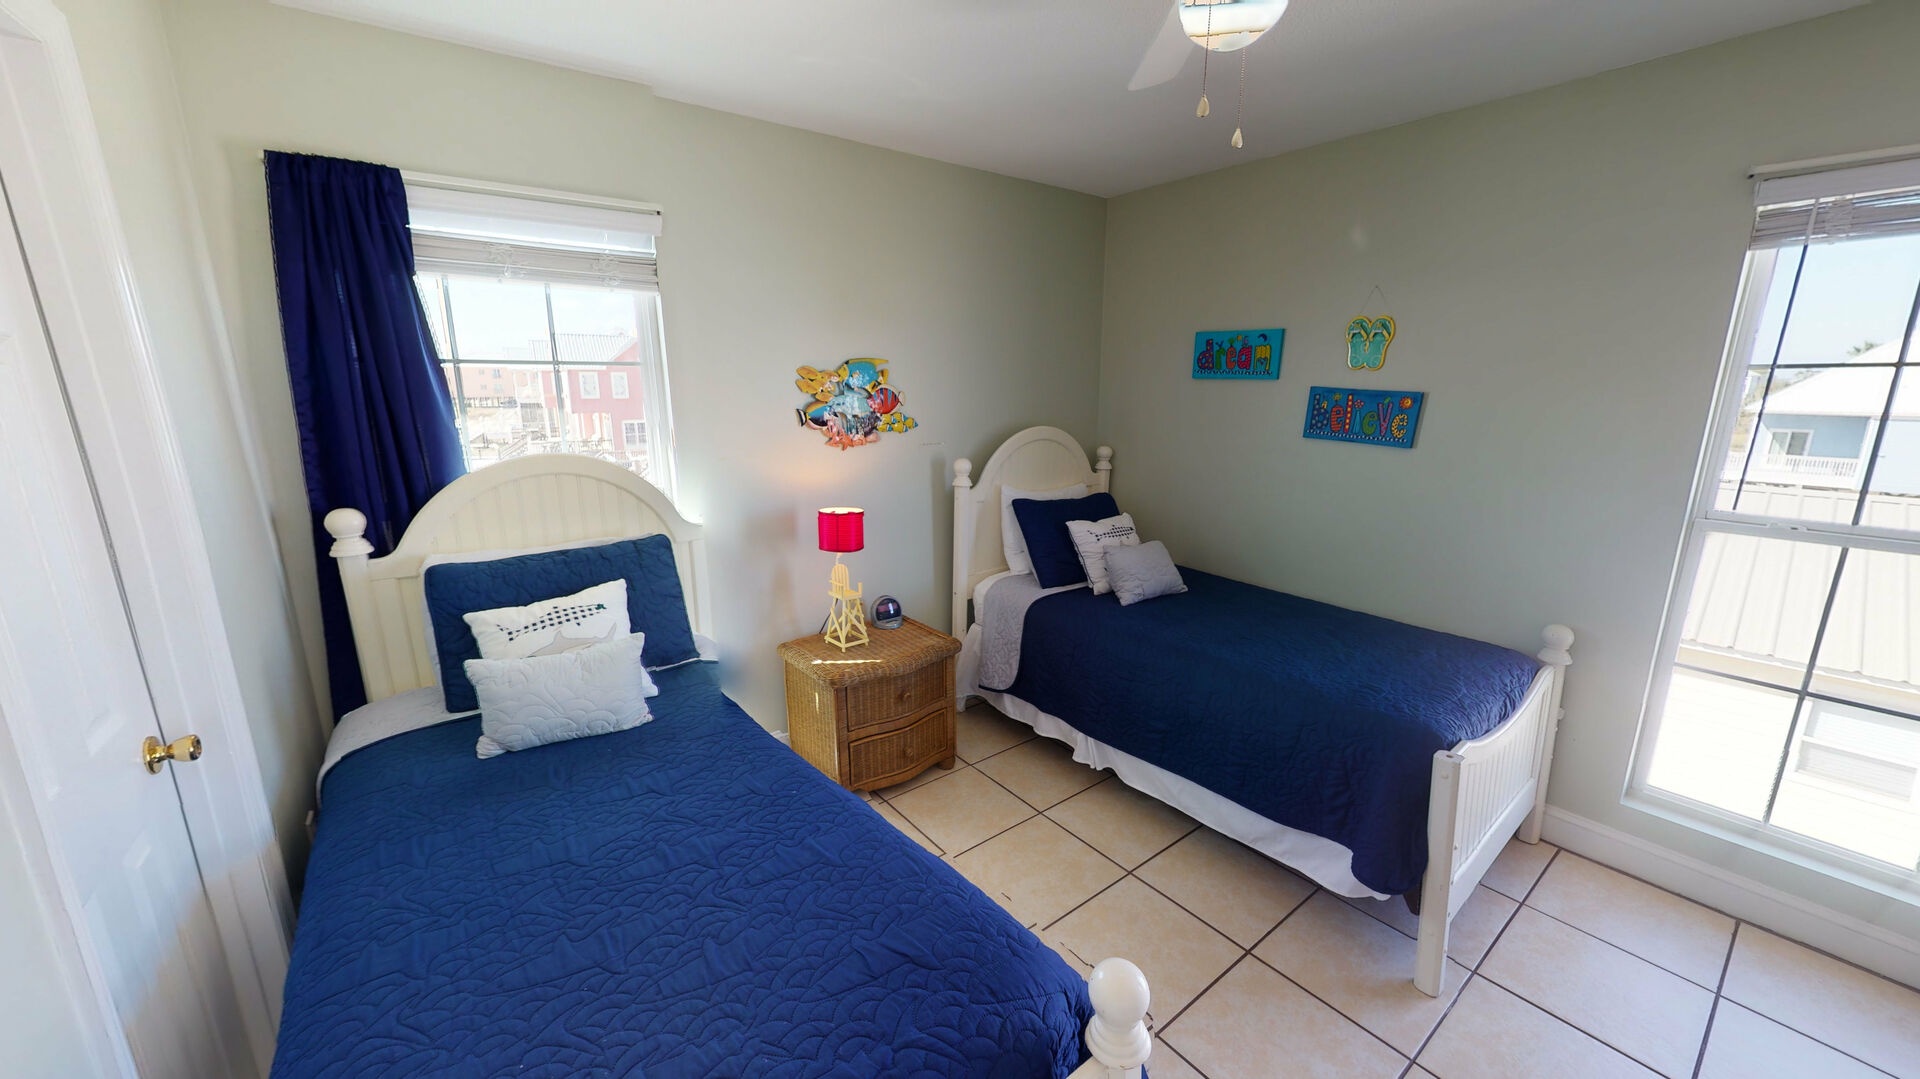 Bedroom #5 sleeps 2 in the twin beds located on the 2nd floor